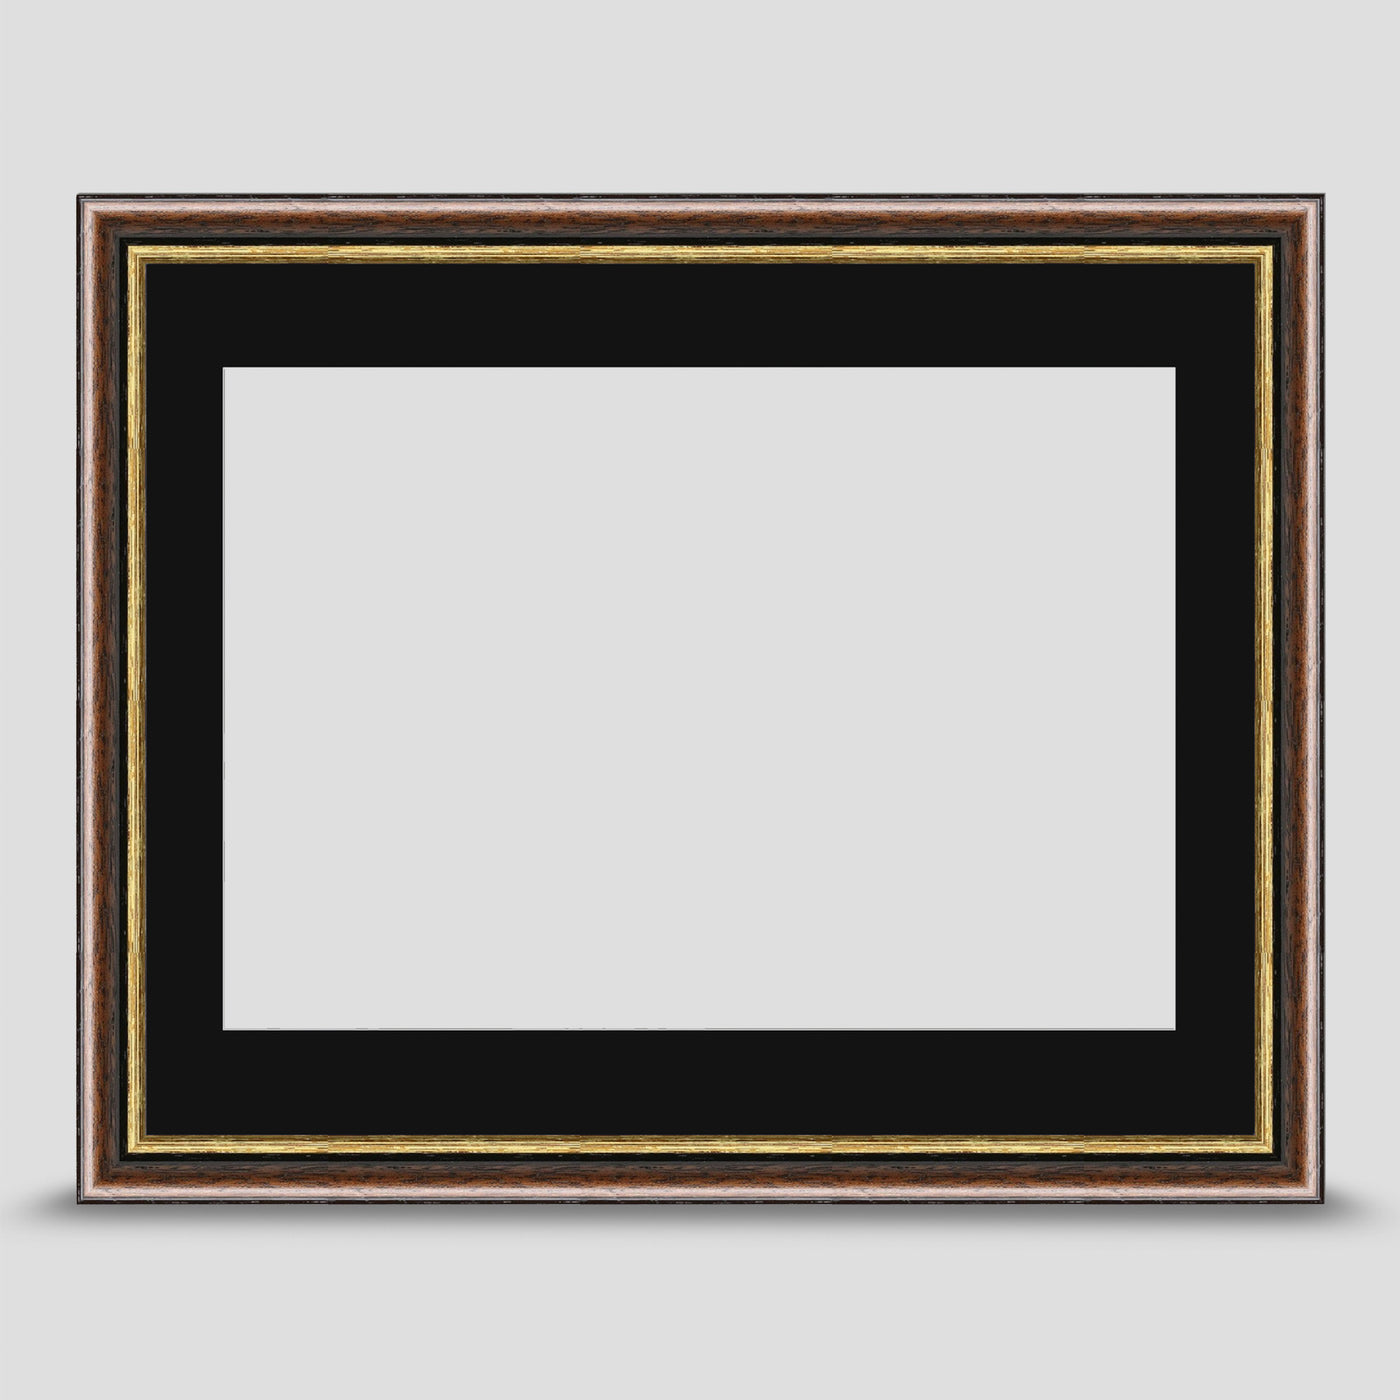 14x11 Brown & Gold Picture Frame with a A4 Mount